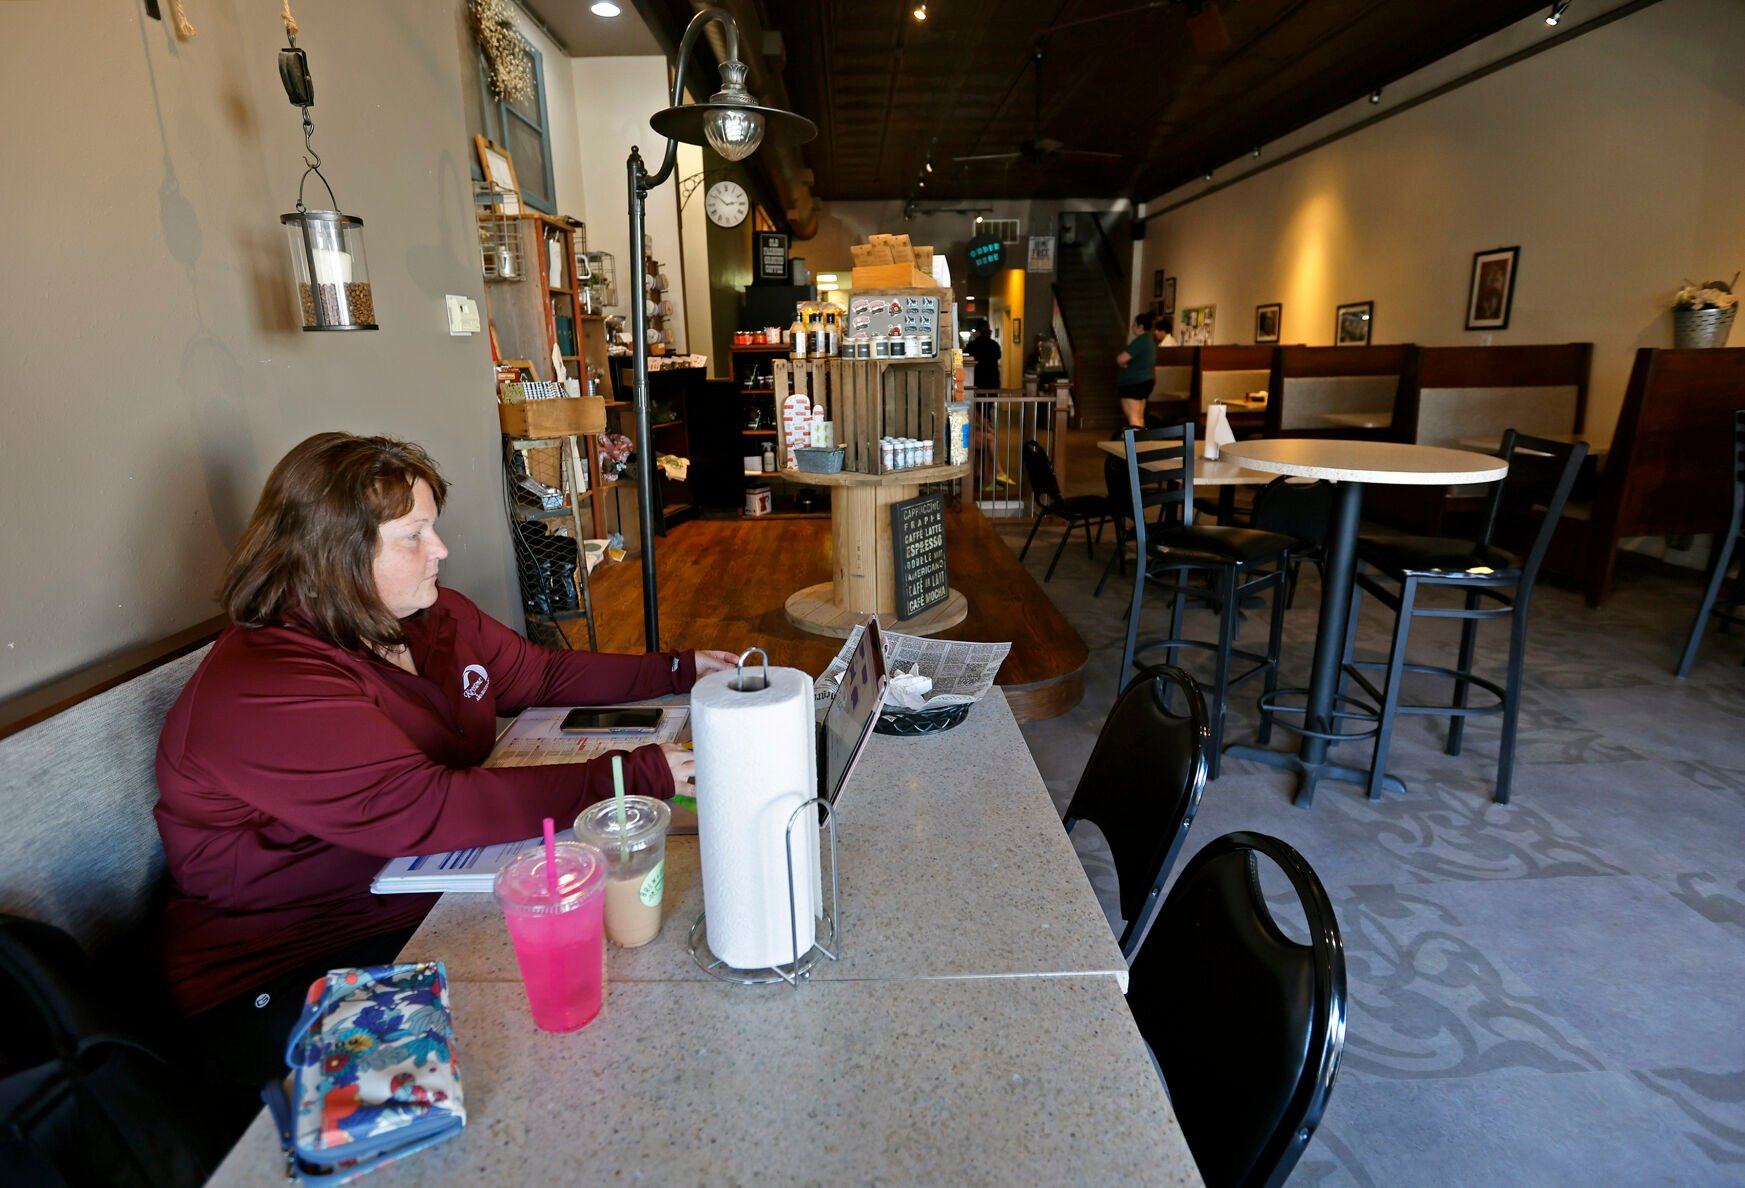 Shana Willenbring, of Dyersville, Iowa, works on her laptop at Brew & Brew in Dyersville on Friday, May 26, 2023.    PHOTO CREDIT: JESSICA REILLY